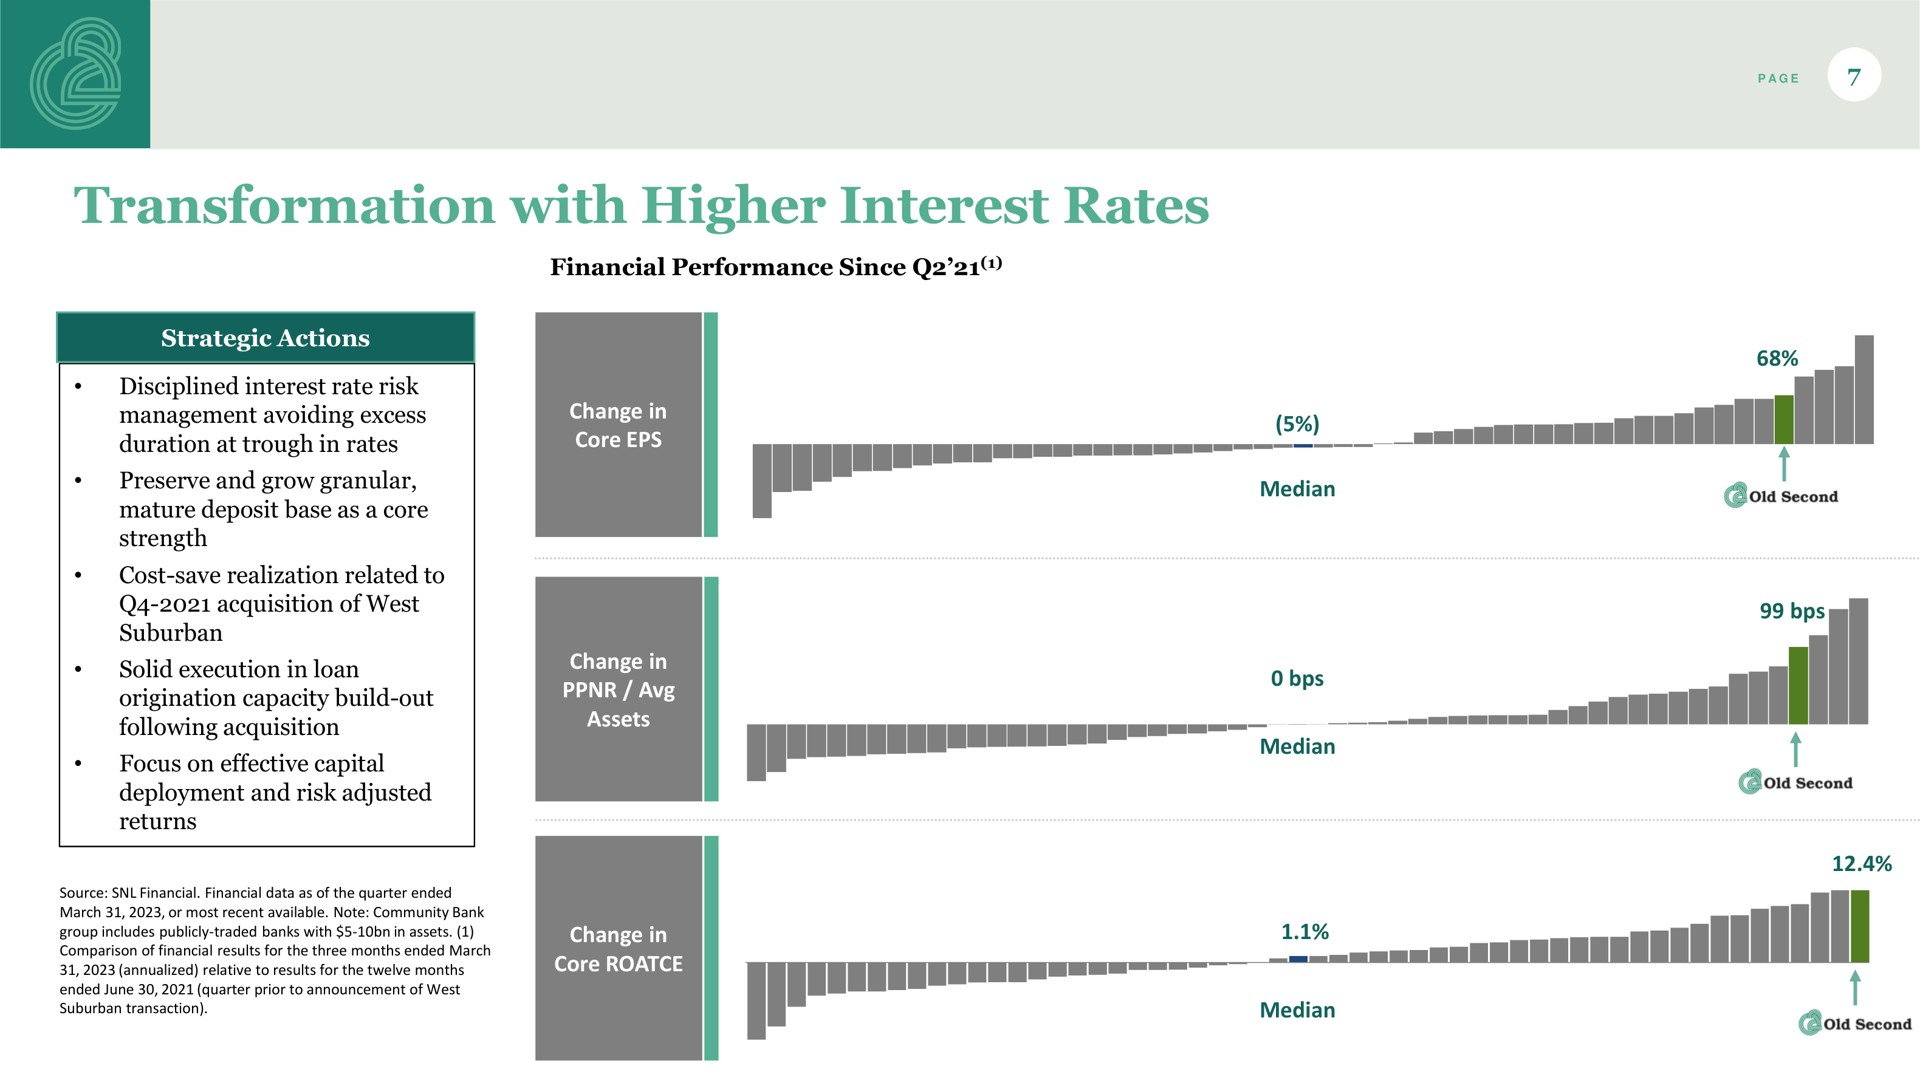 transformation with higher interest rates me | Old Second Bancorp